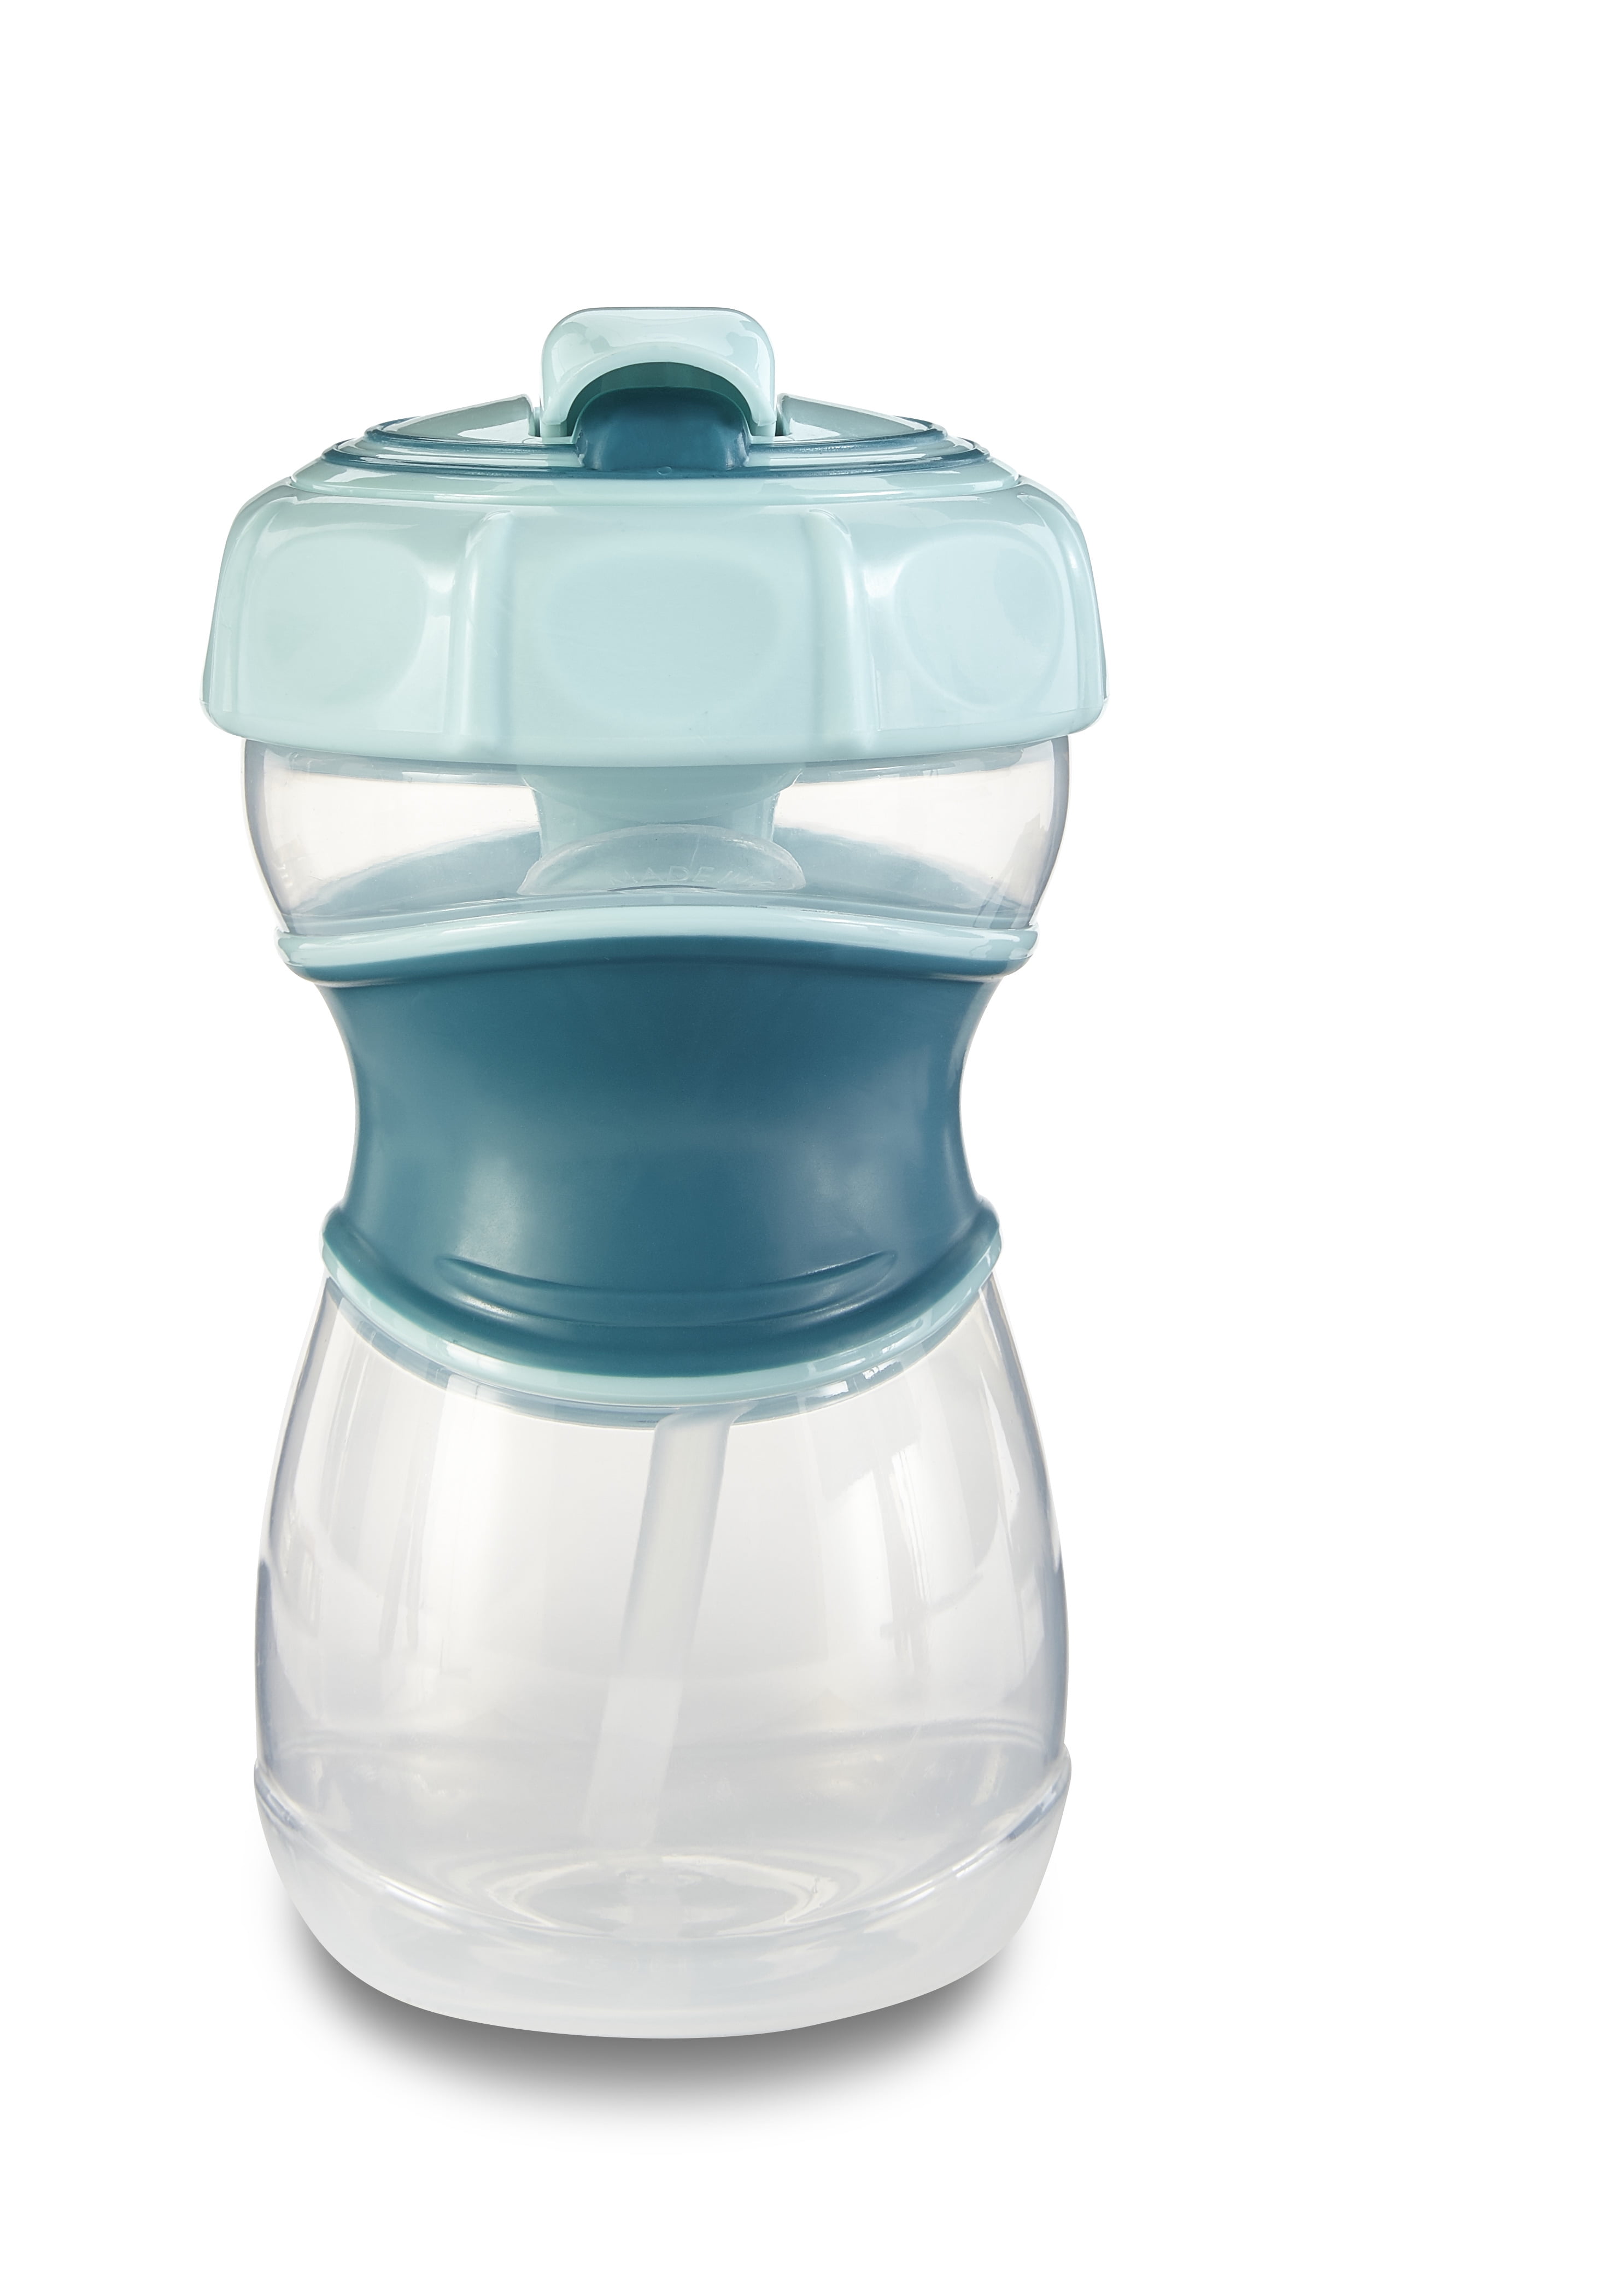 Nuby Toddler Travel Sippy Cup 12 Ounce Blue Gray Straw Plastic Rubber Grip